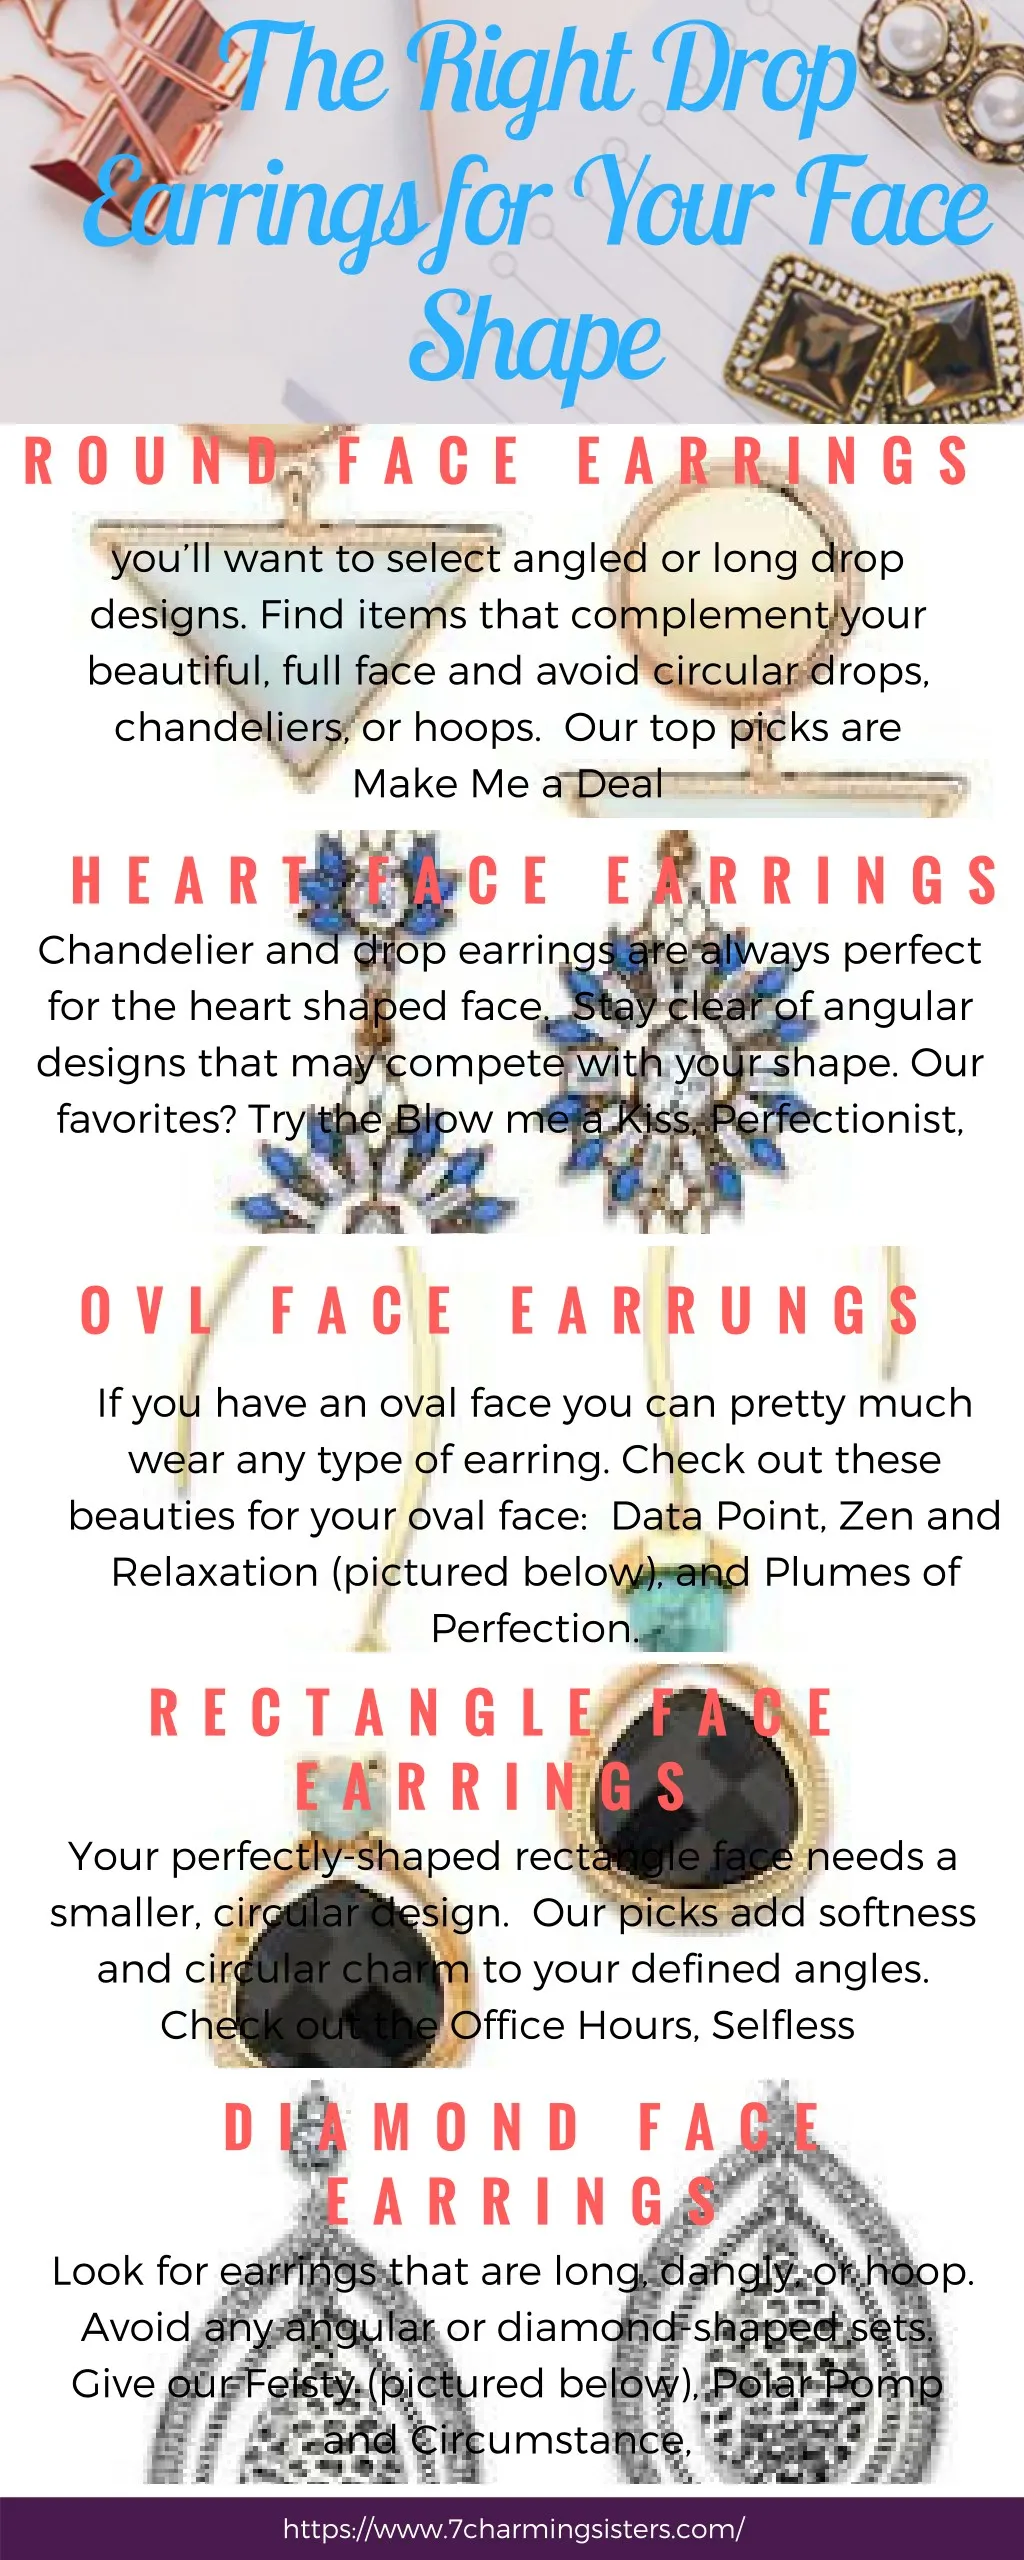 the right drop earrings for your face shape